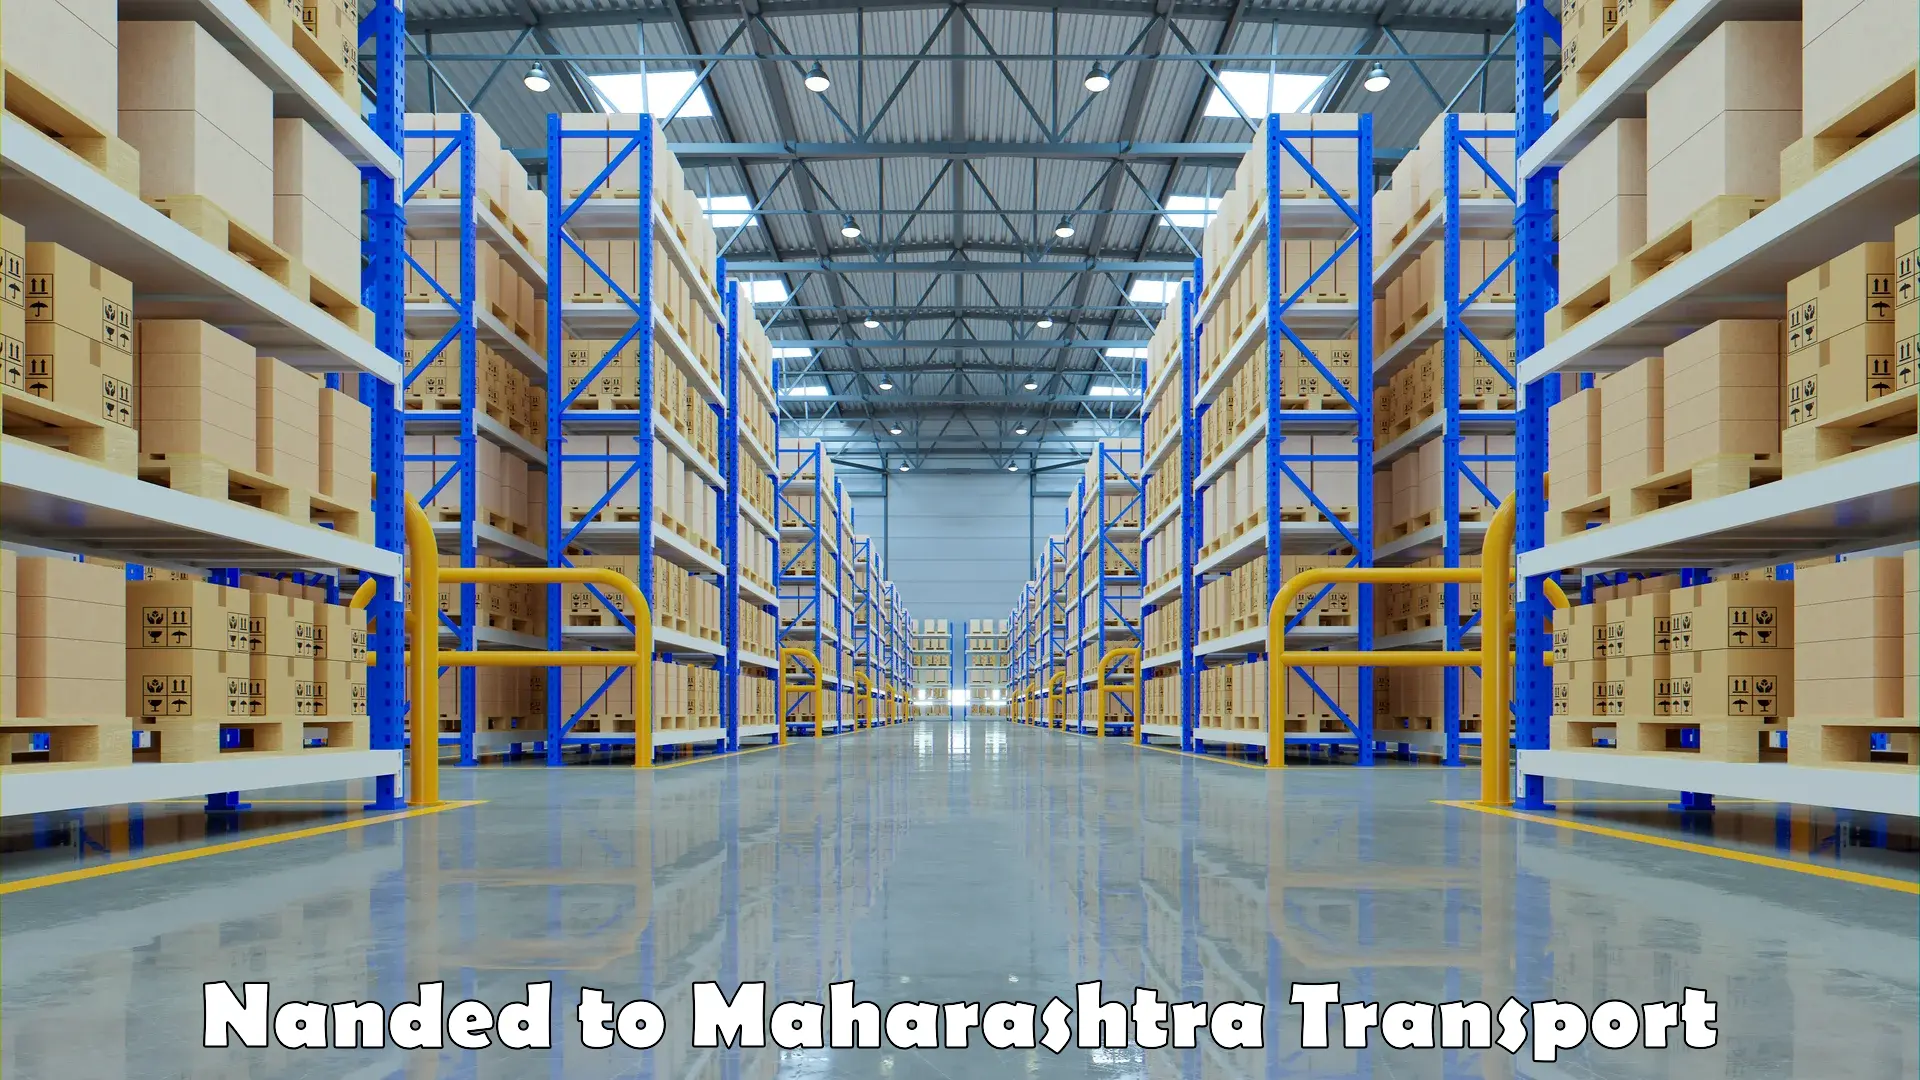 Truck transport companies in India Nanded to Mumbai